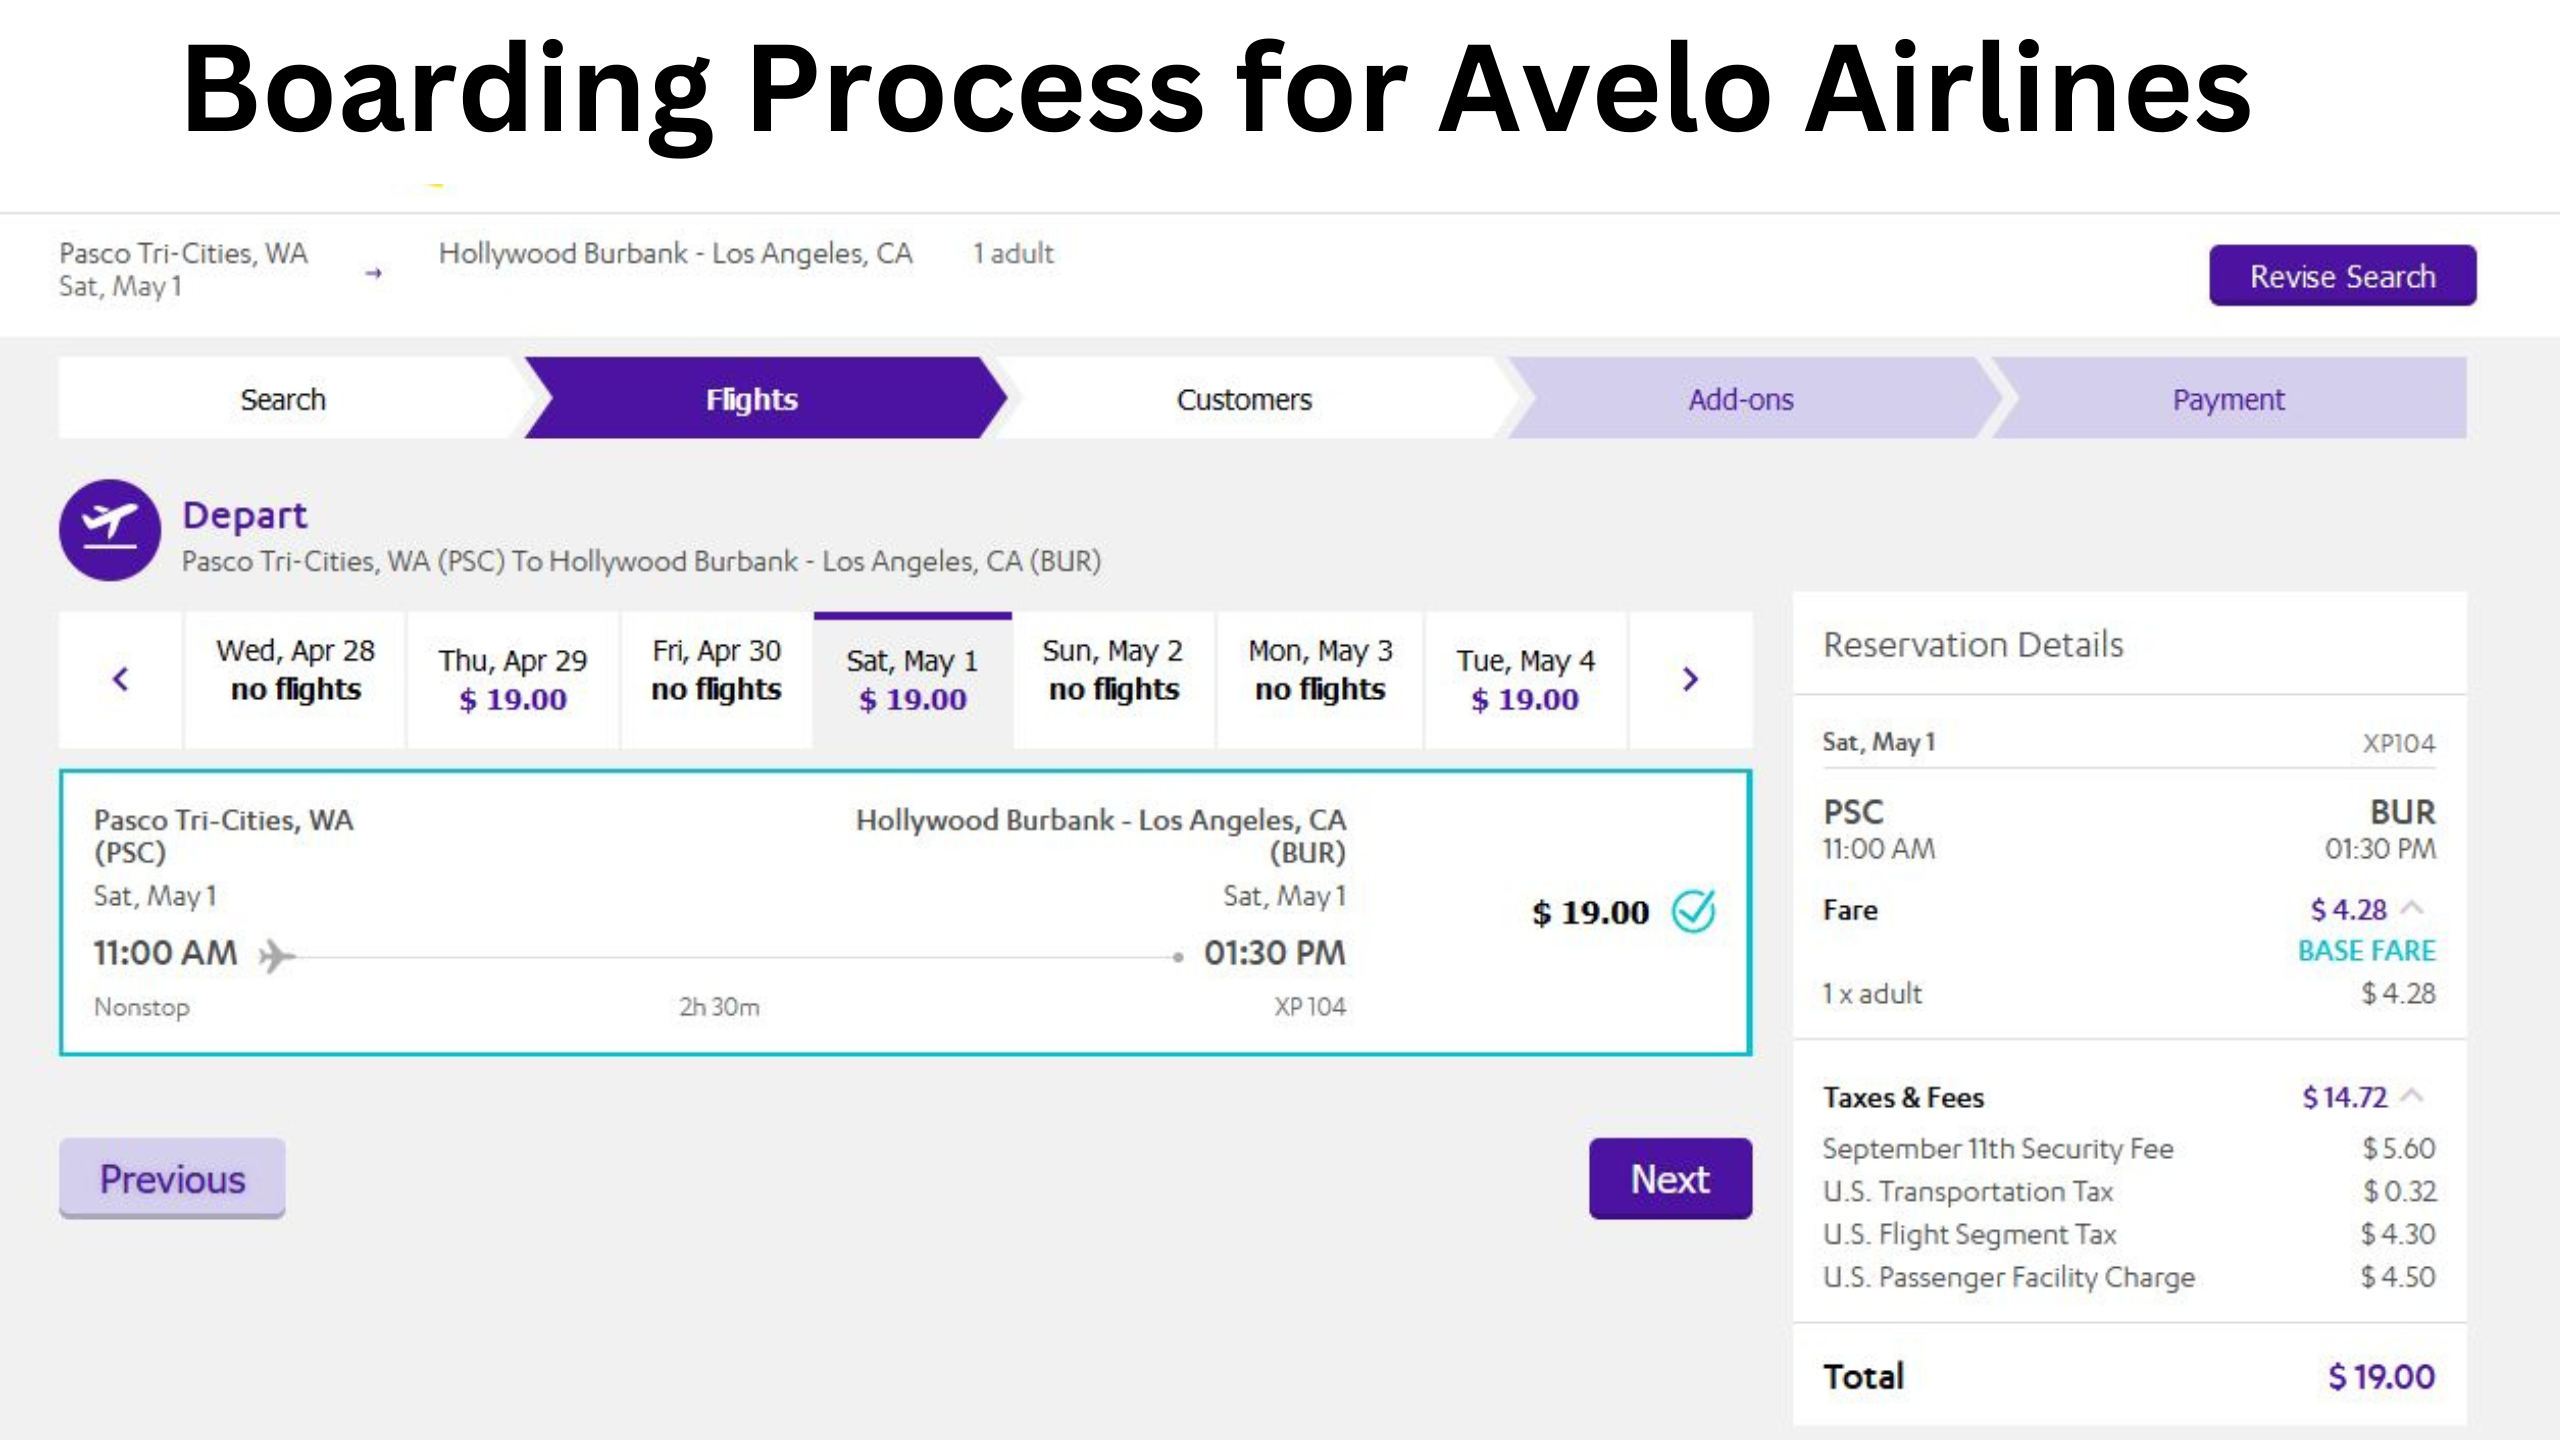 Boarding Process for Avelo Airlines